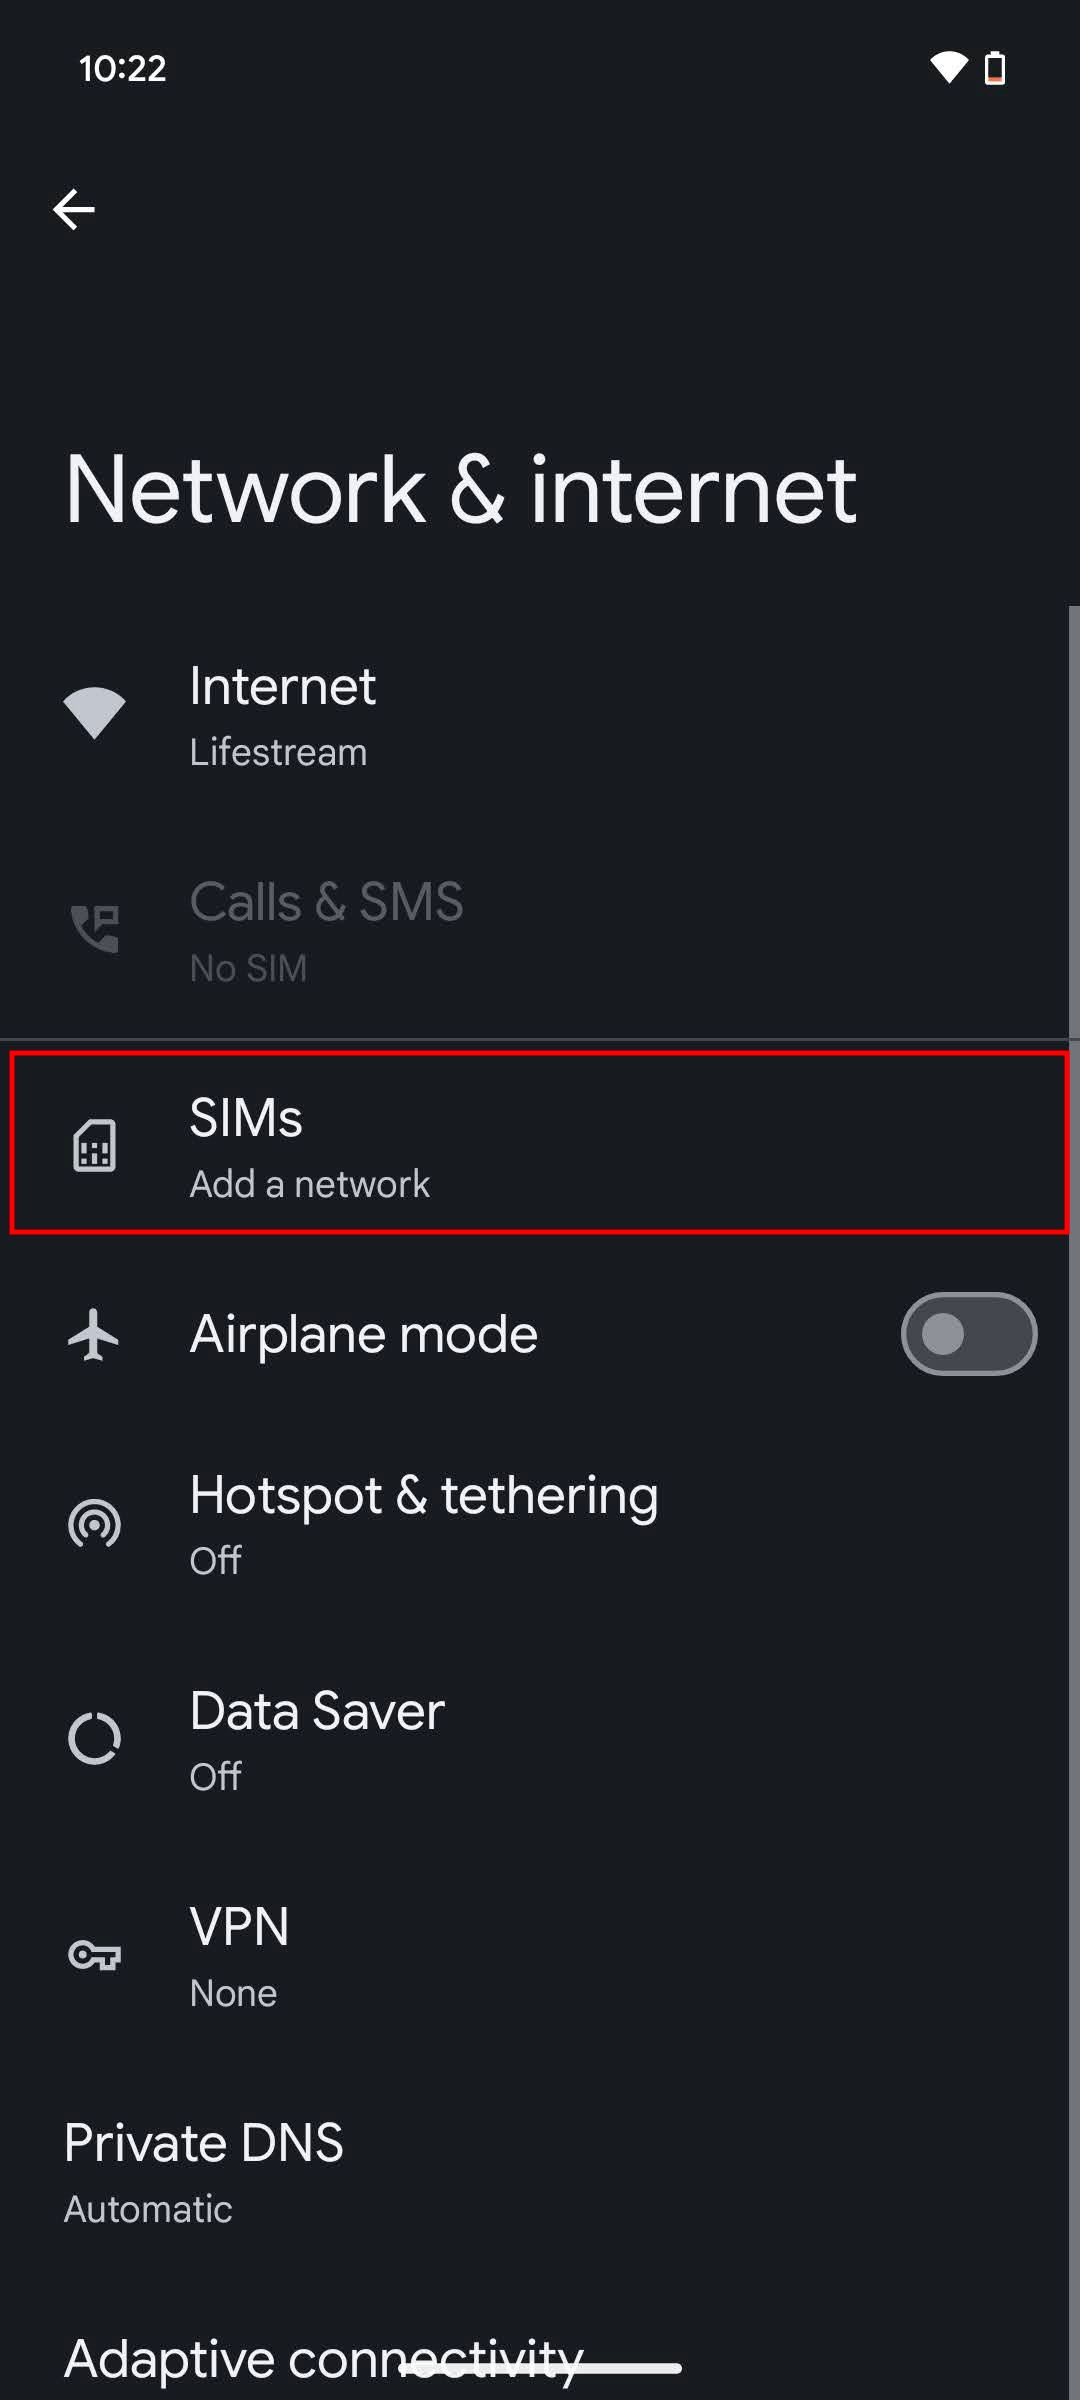 How to activate an eSIM using a QR code on Android (2)